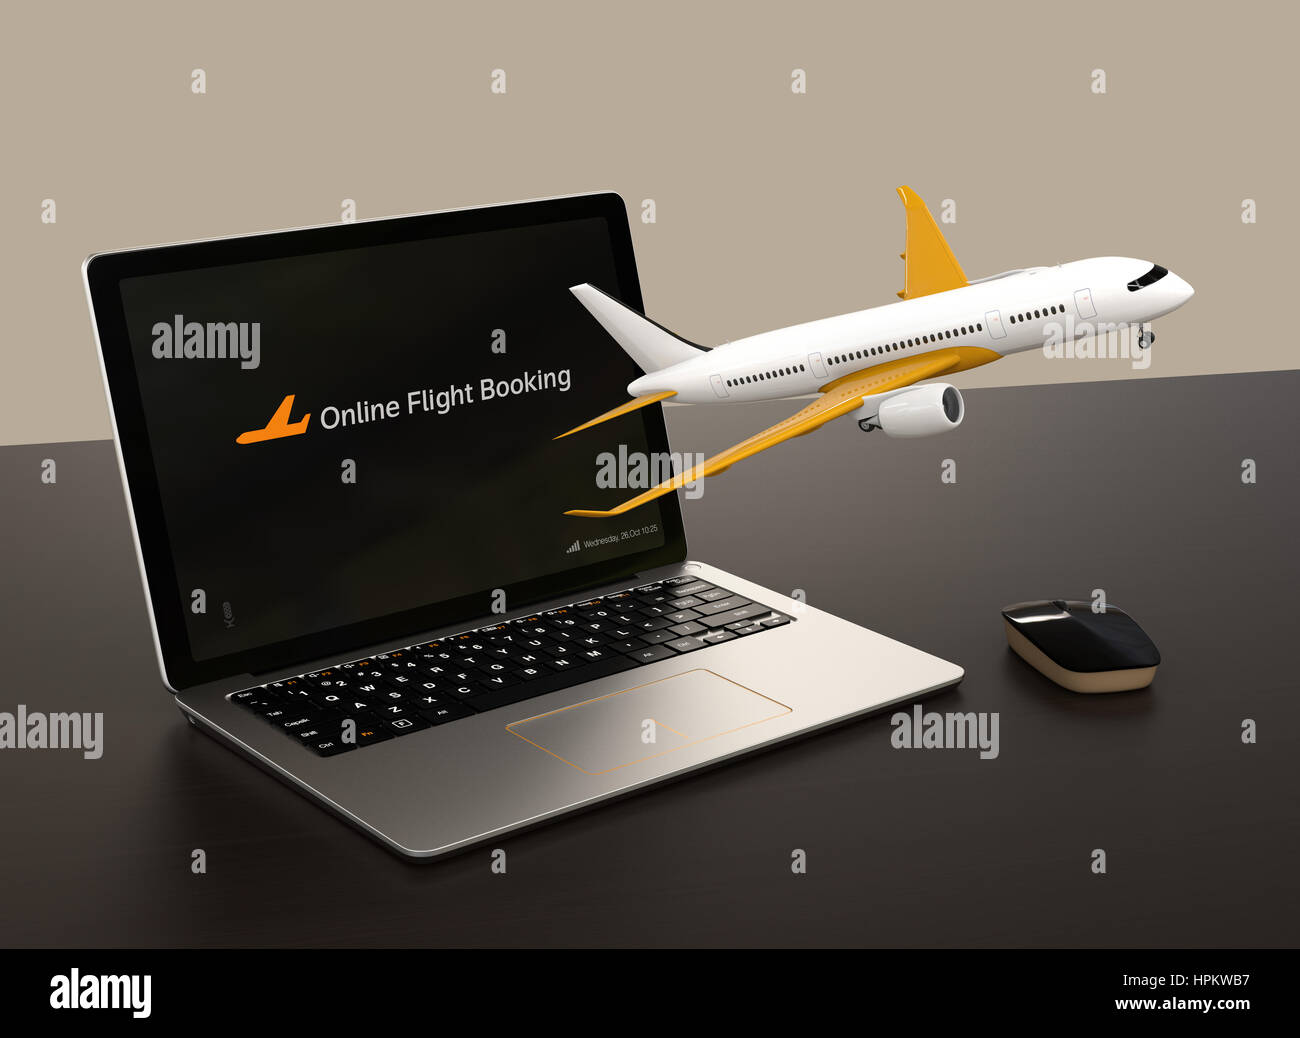 Passenger plane taking off from laptop computer. Online flight booking concept. 3D rendering image. Stock Photo